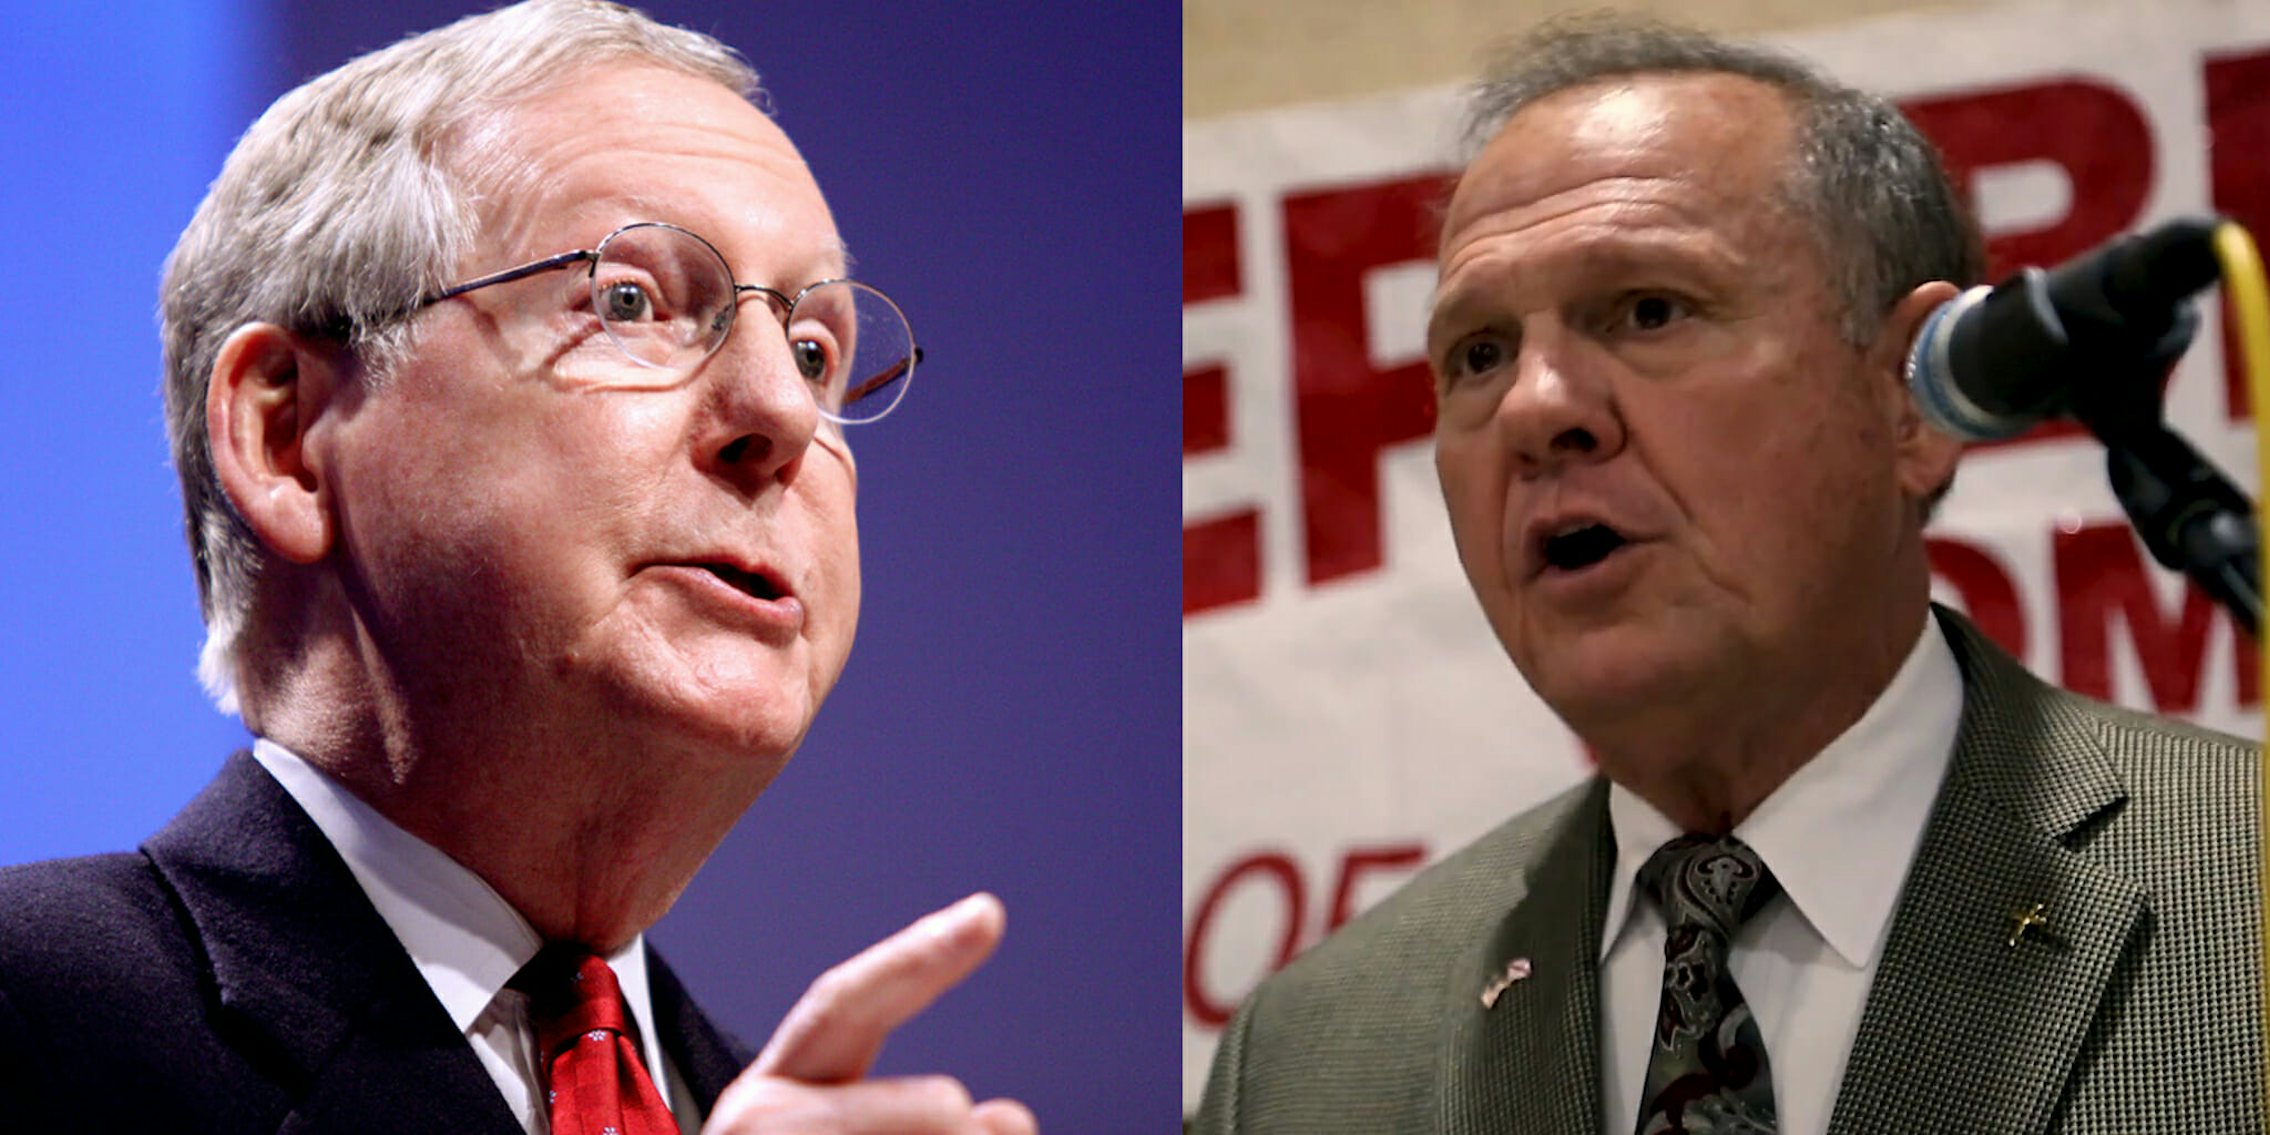 Mitch McConnell said Roy Moore should 'step aside' from the Alabama senate race following accusations that he sexually assaulted a 14-year-old and dated other teenagers.